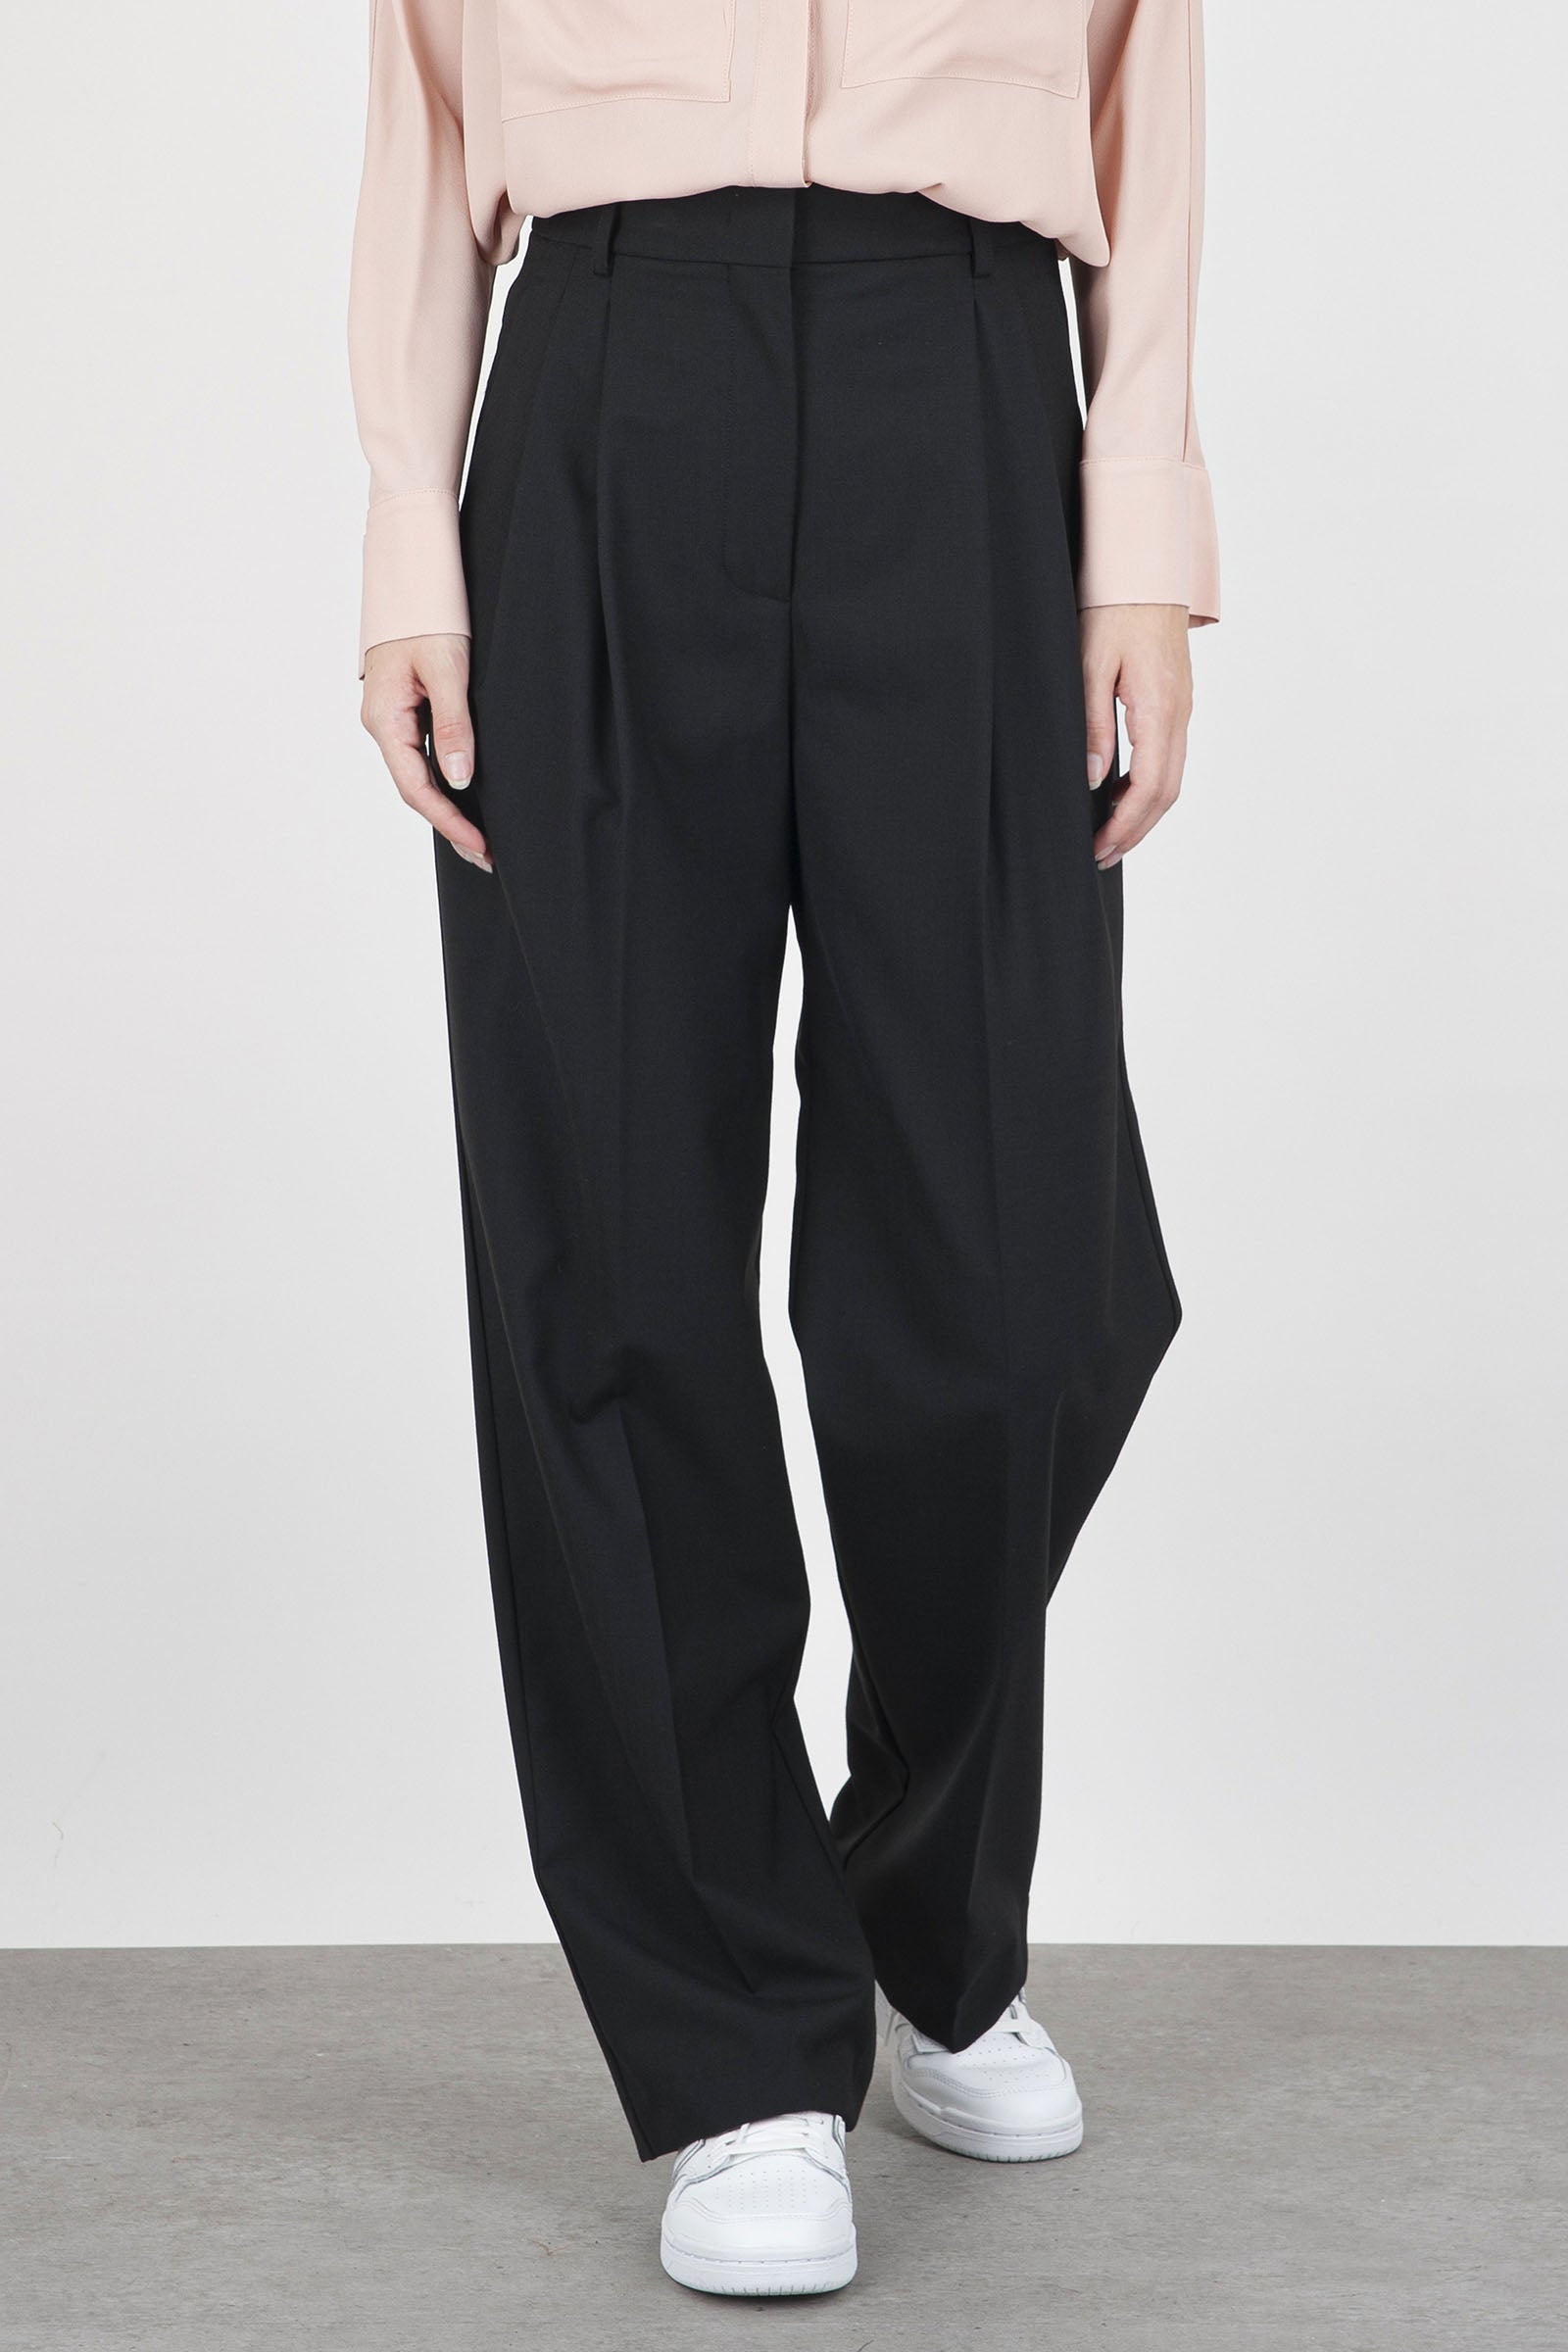 Semicouture Jody Synthetic Trousers Black - 1